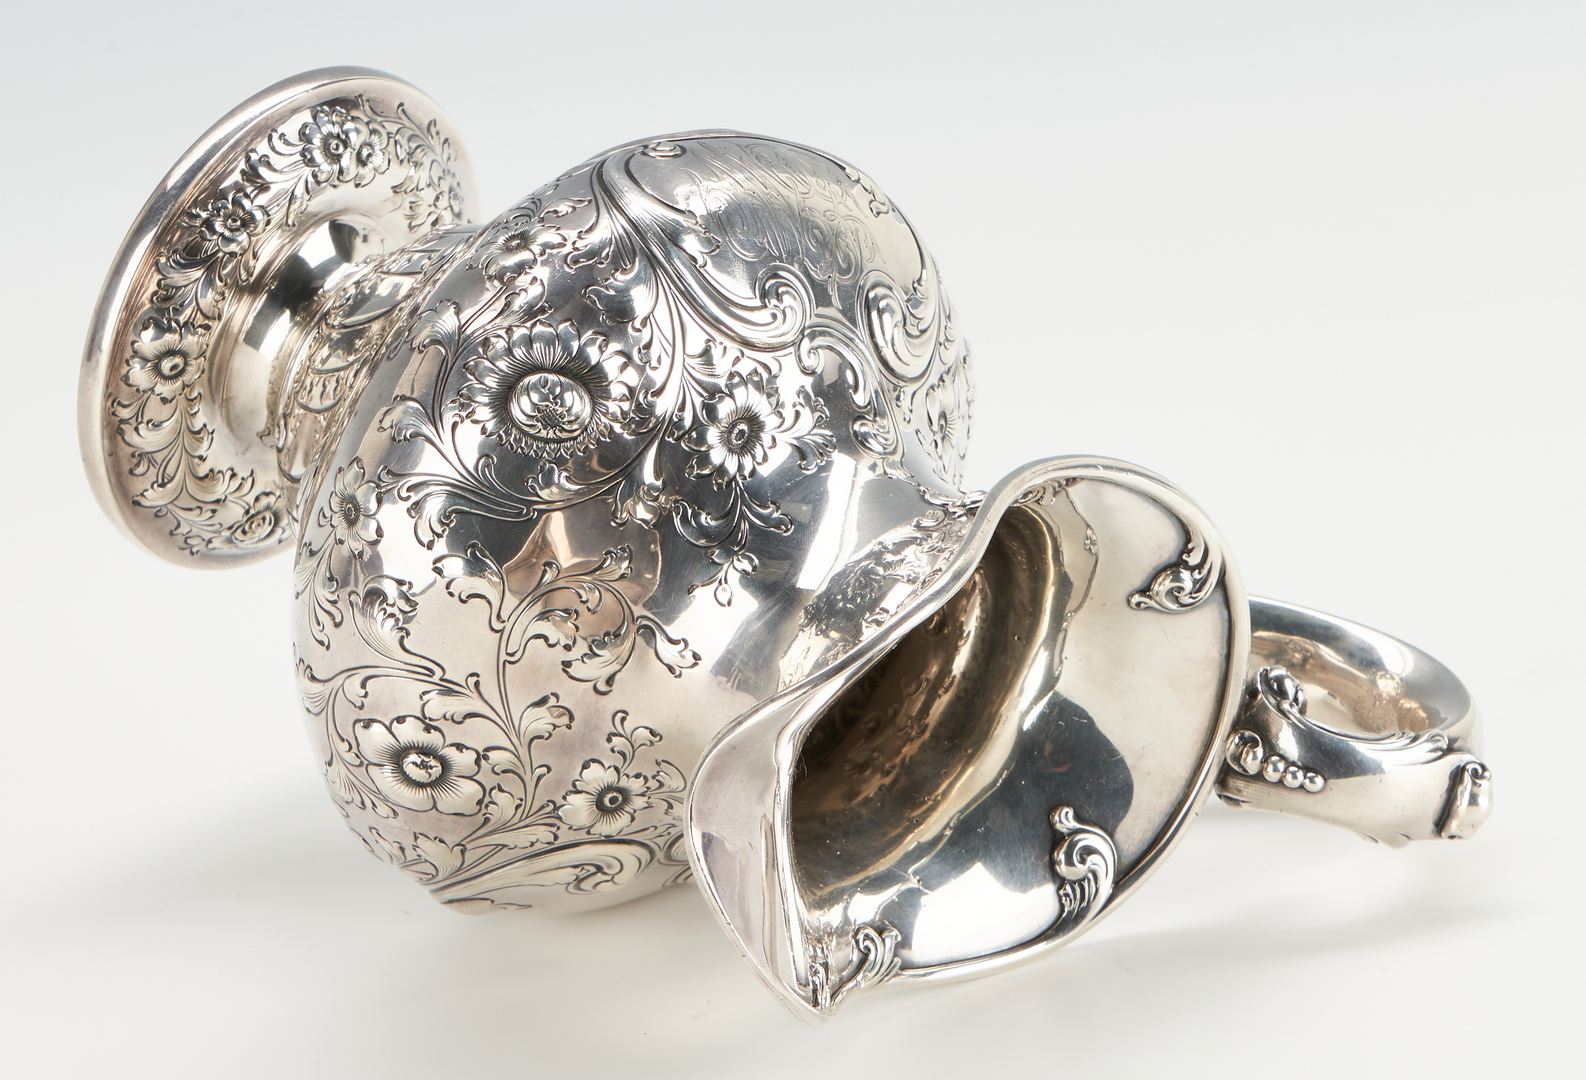 Lot 436: Howard & Co. Sterling Silver Pitcher